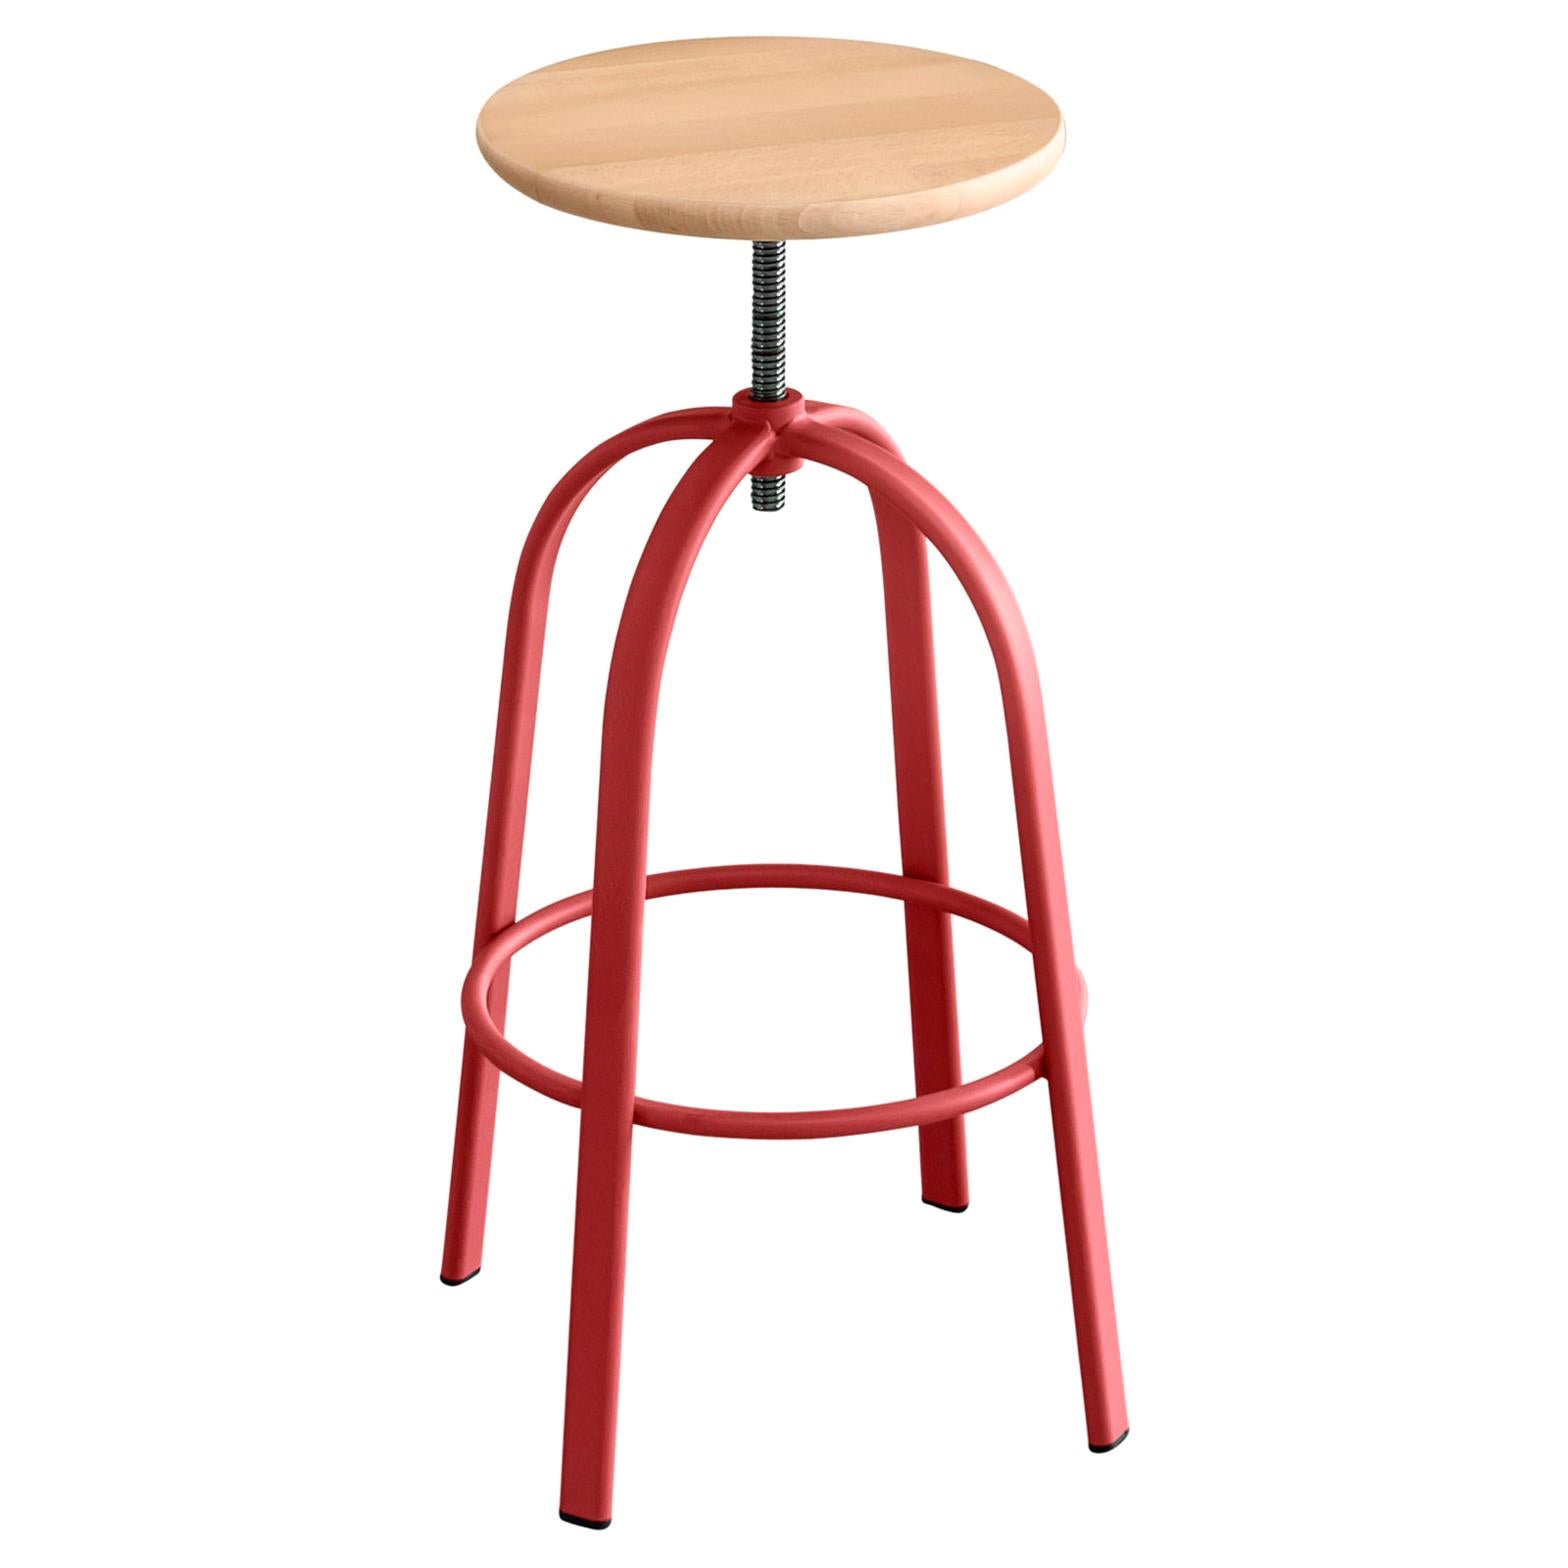 Ferrovitos Stool in Beech Top with Marsala Red Legs by Paolo Cappello For Sale